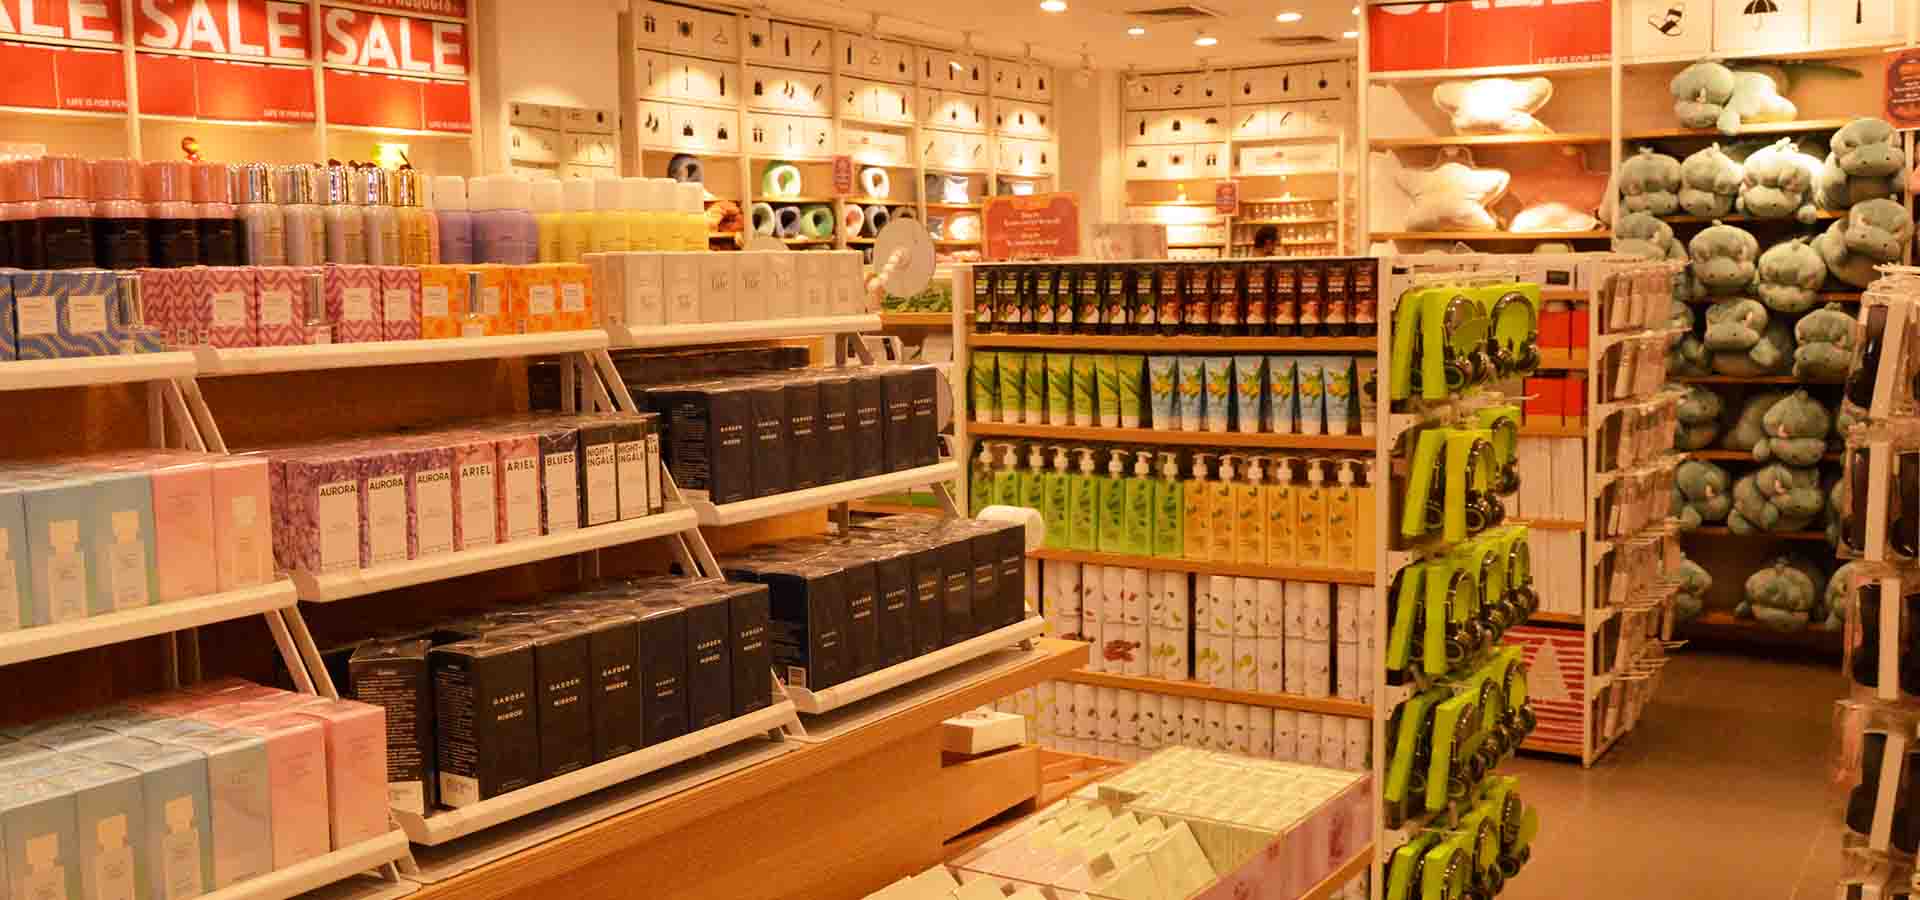 Miniso Lifestyle store photos in mall